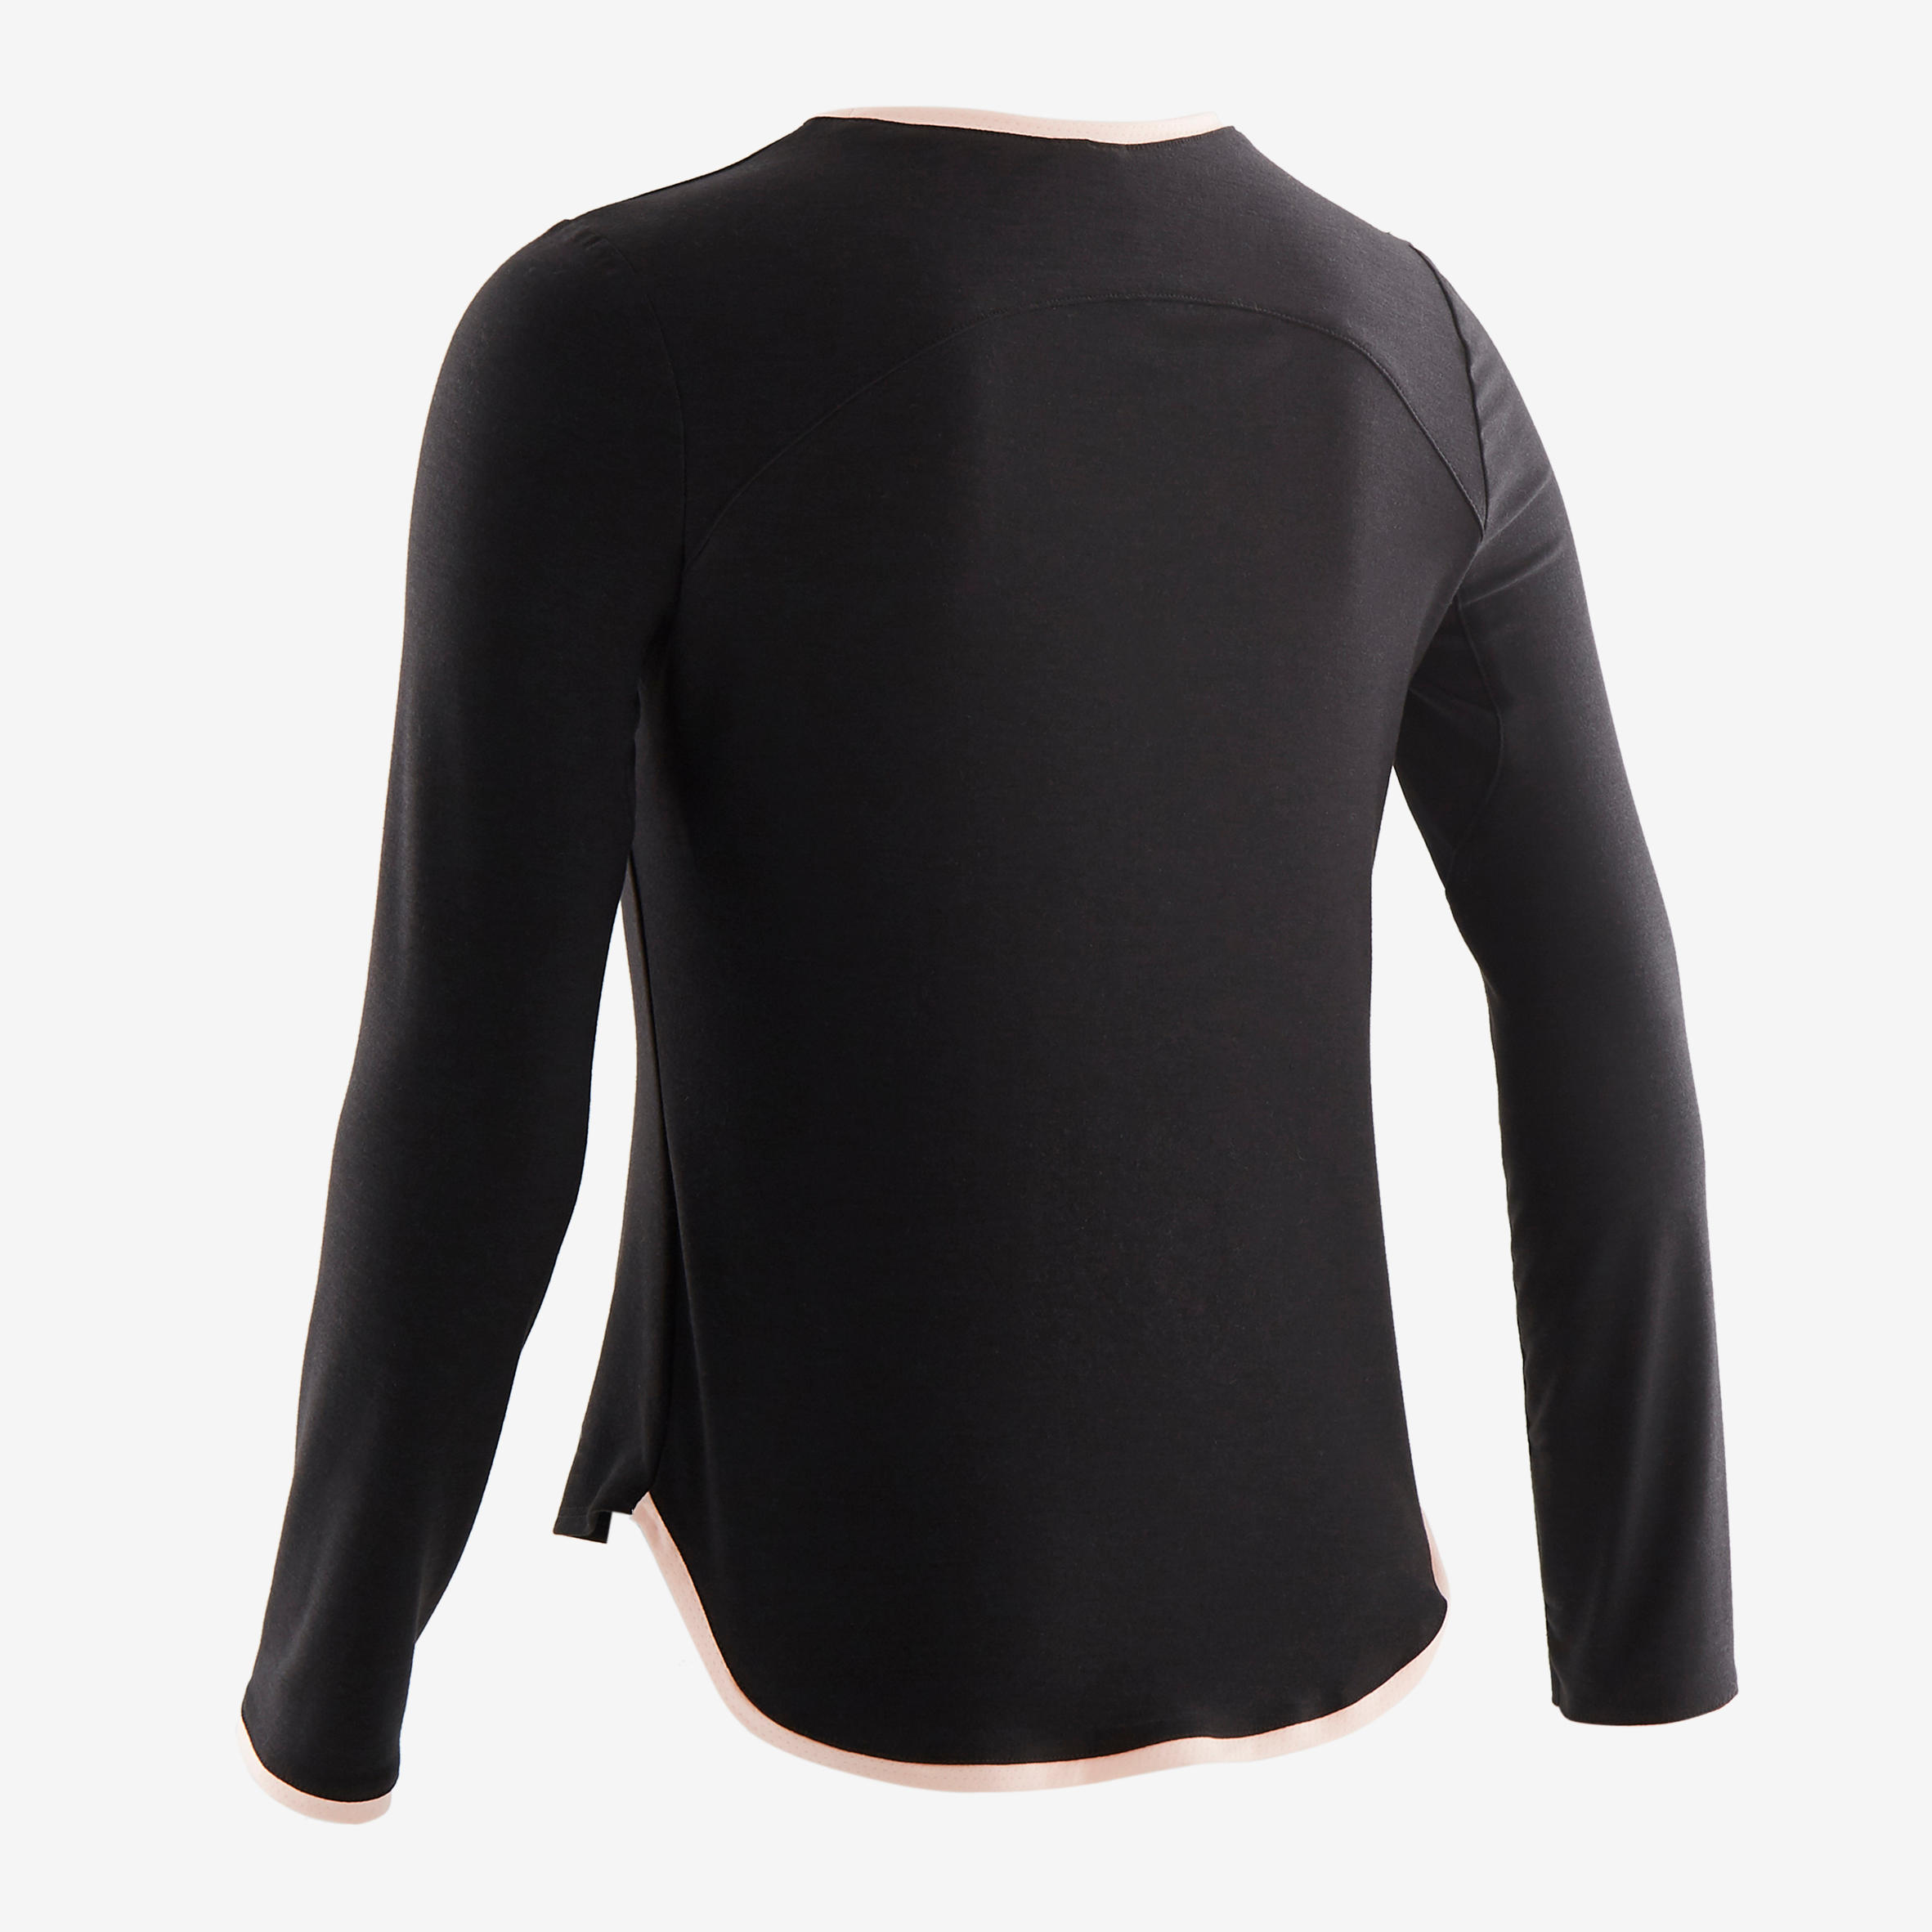 Kids' Long-Sleeved Breathable Cotton Gym T-Shirt 500 - Black/Pink 3/6